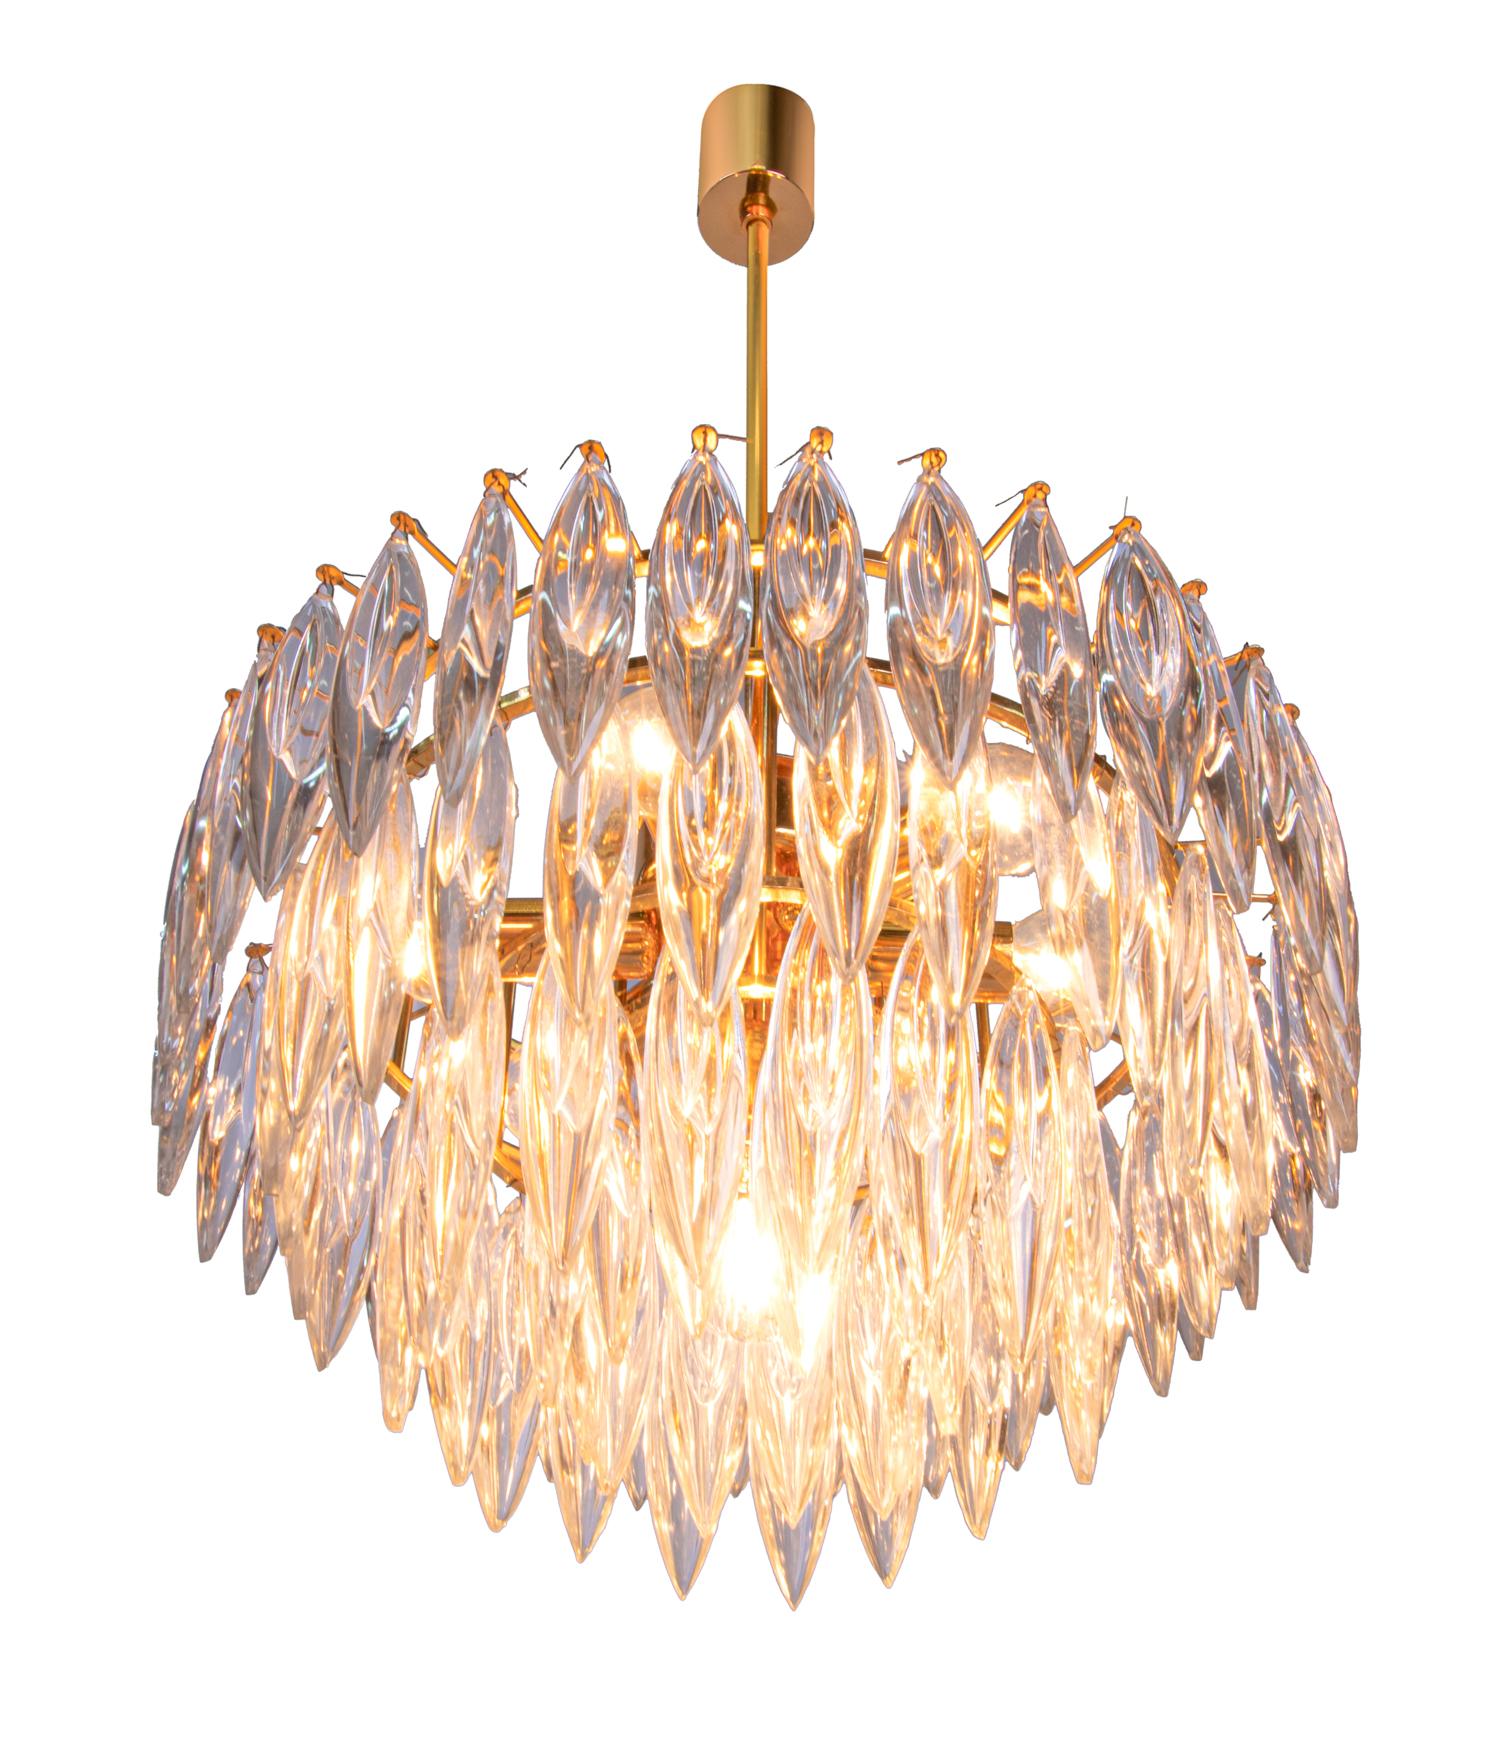 Impressive 7 lights chandelier of excellent quality with long crystals on a gold plated frame. The chandelier has an incomparable unique character through its gold base and the long clear crystals. Manufactured by Lobmeyr / Bakalowits & Sons in